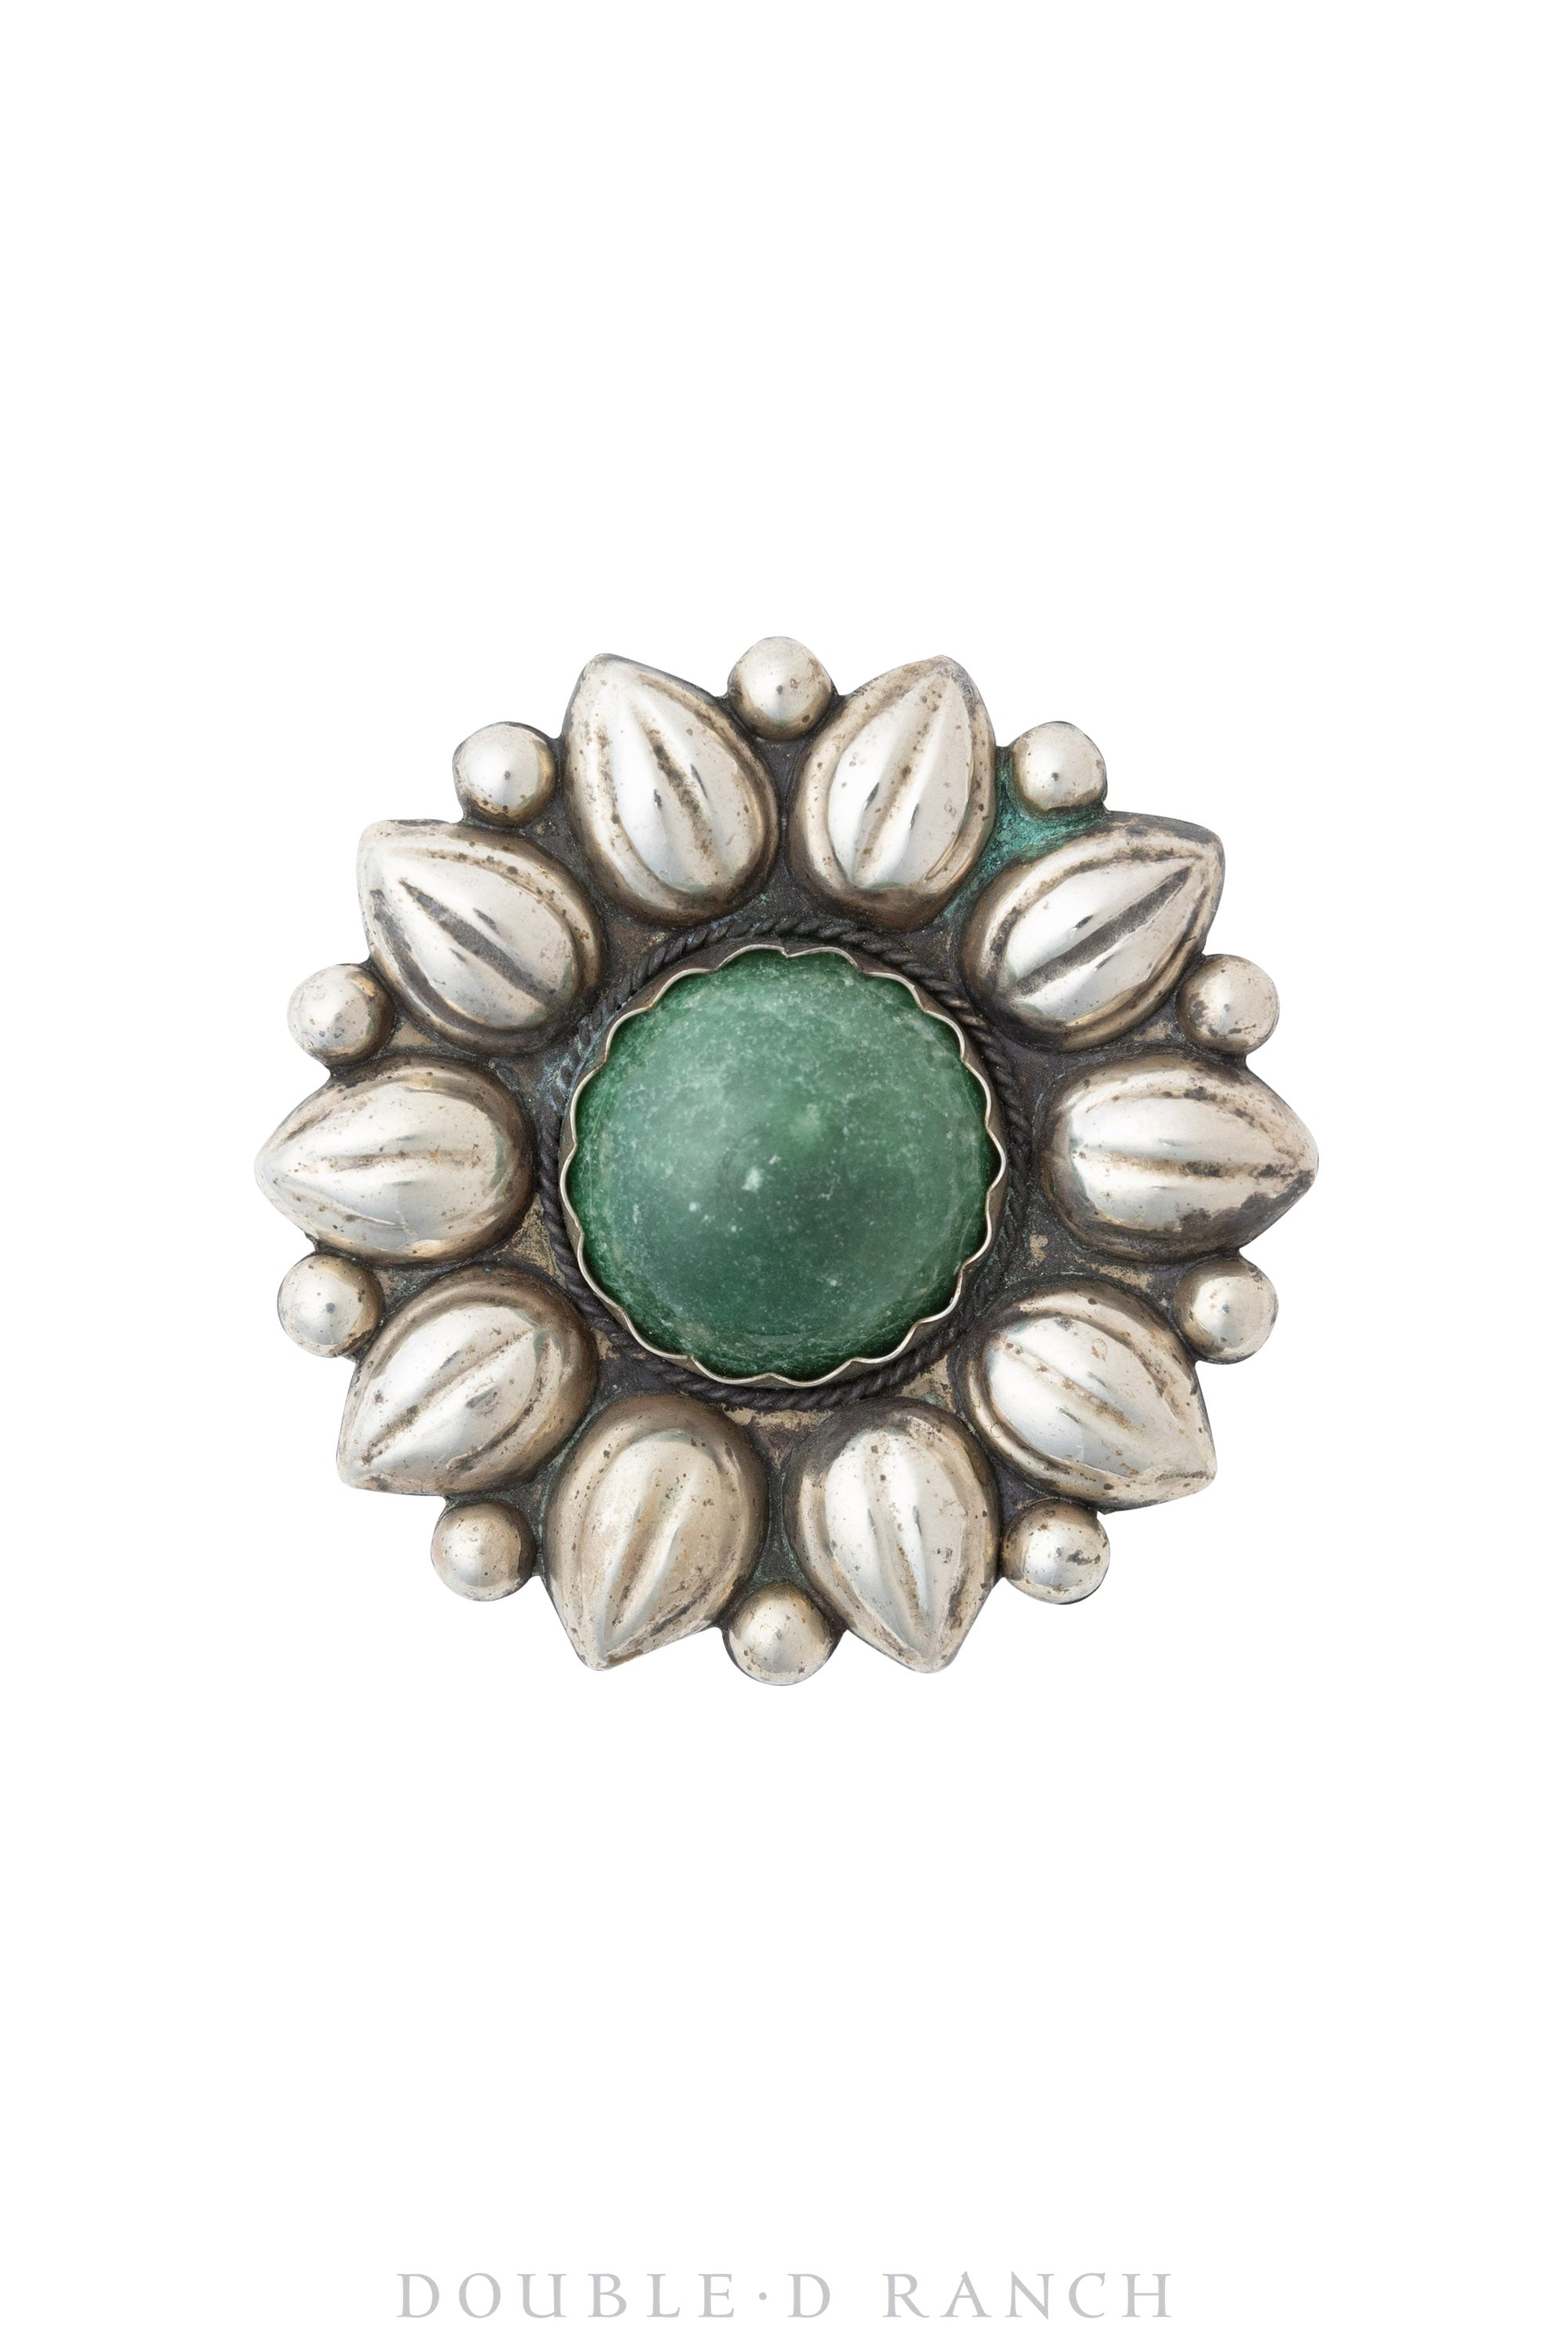 Pin, Natural Stone, Green Agate, Taxco, Vintage '50, 865